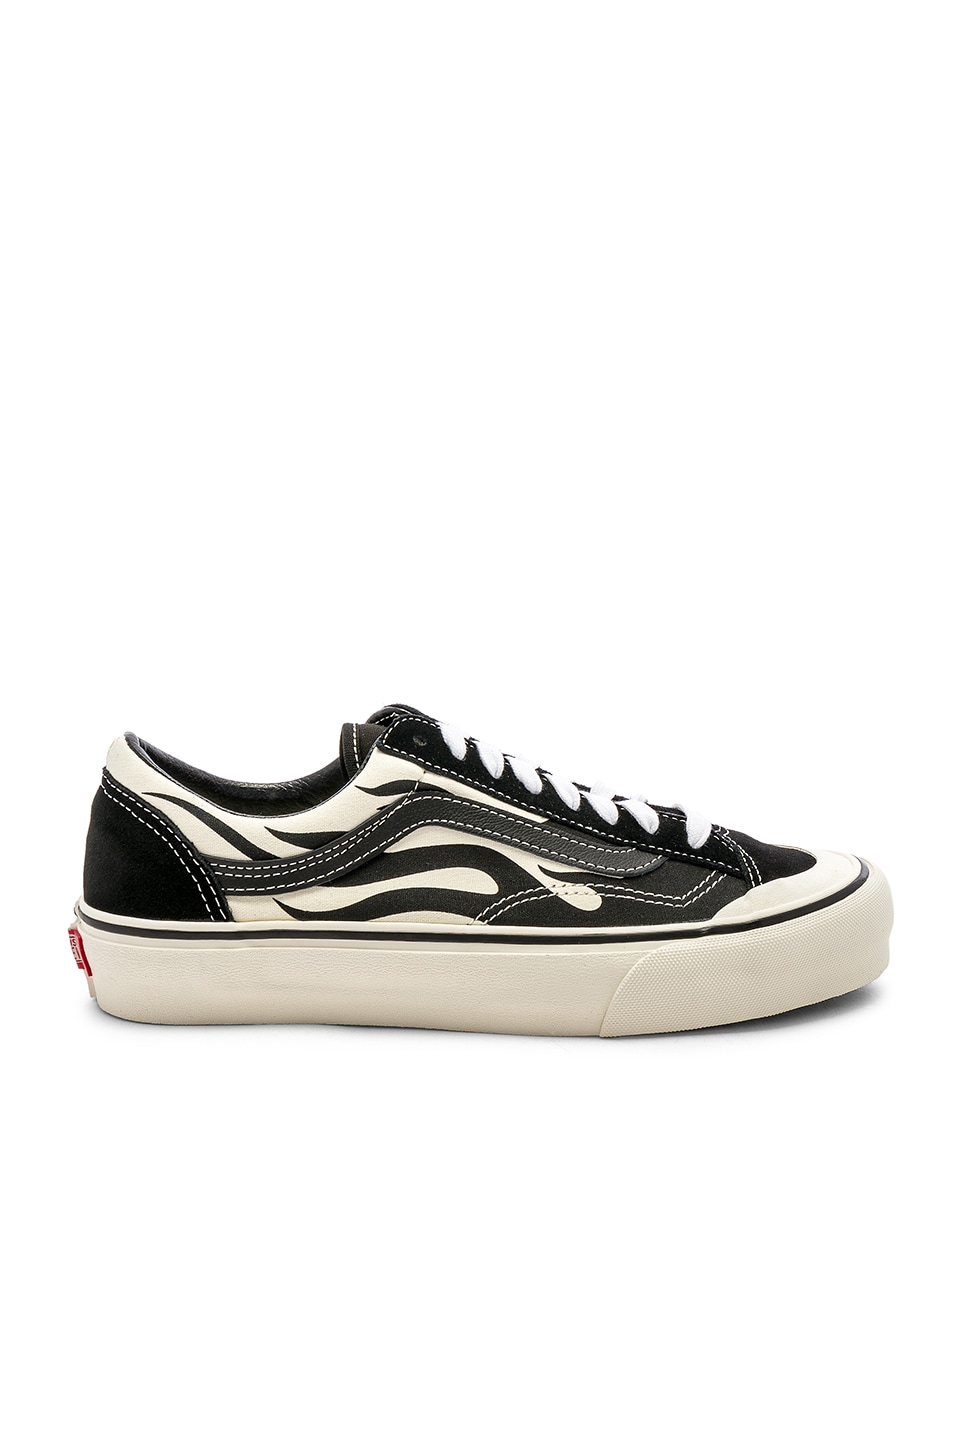 vans style 36 flame off 50% - www 